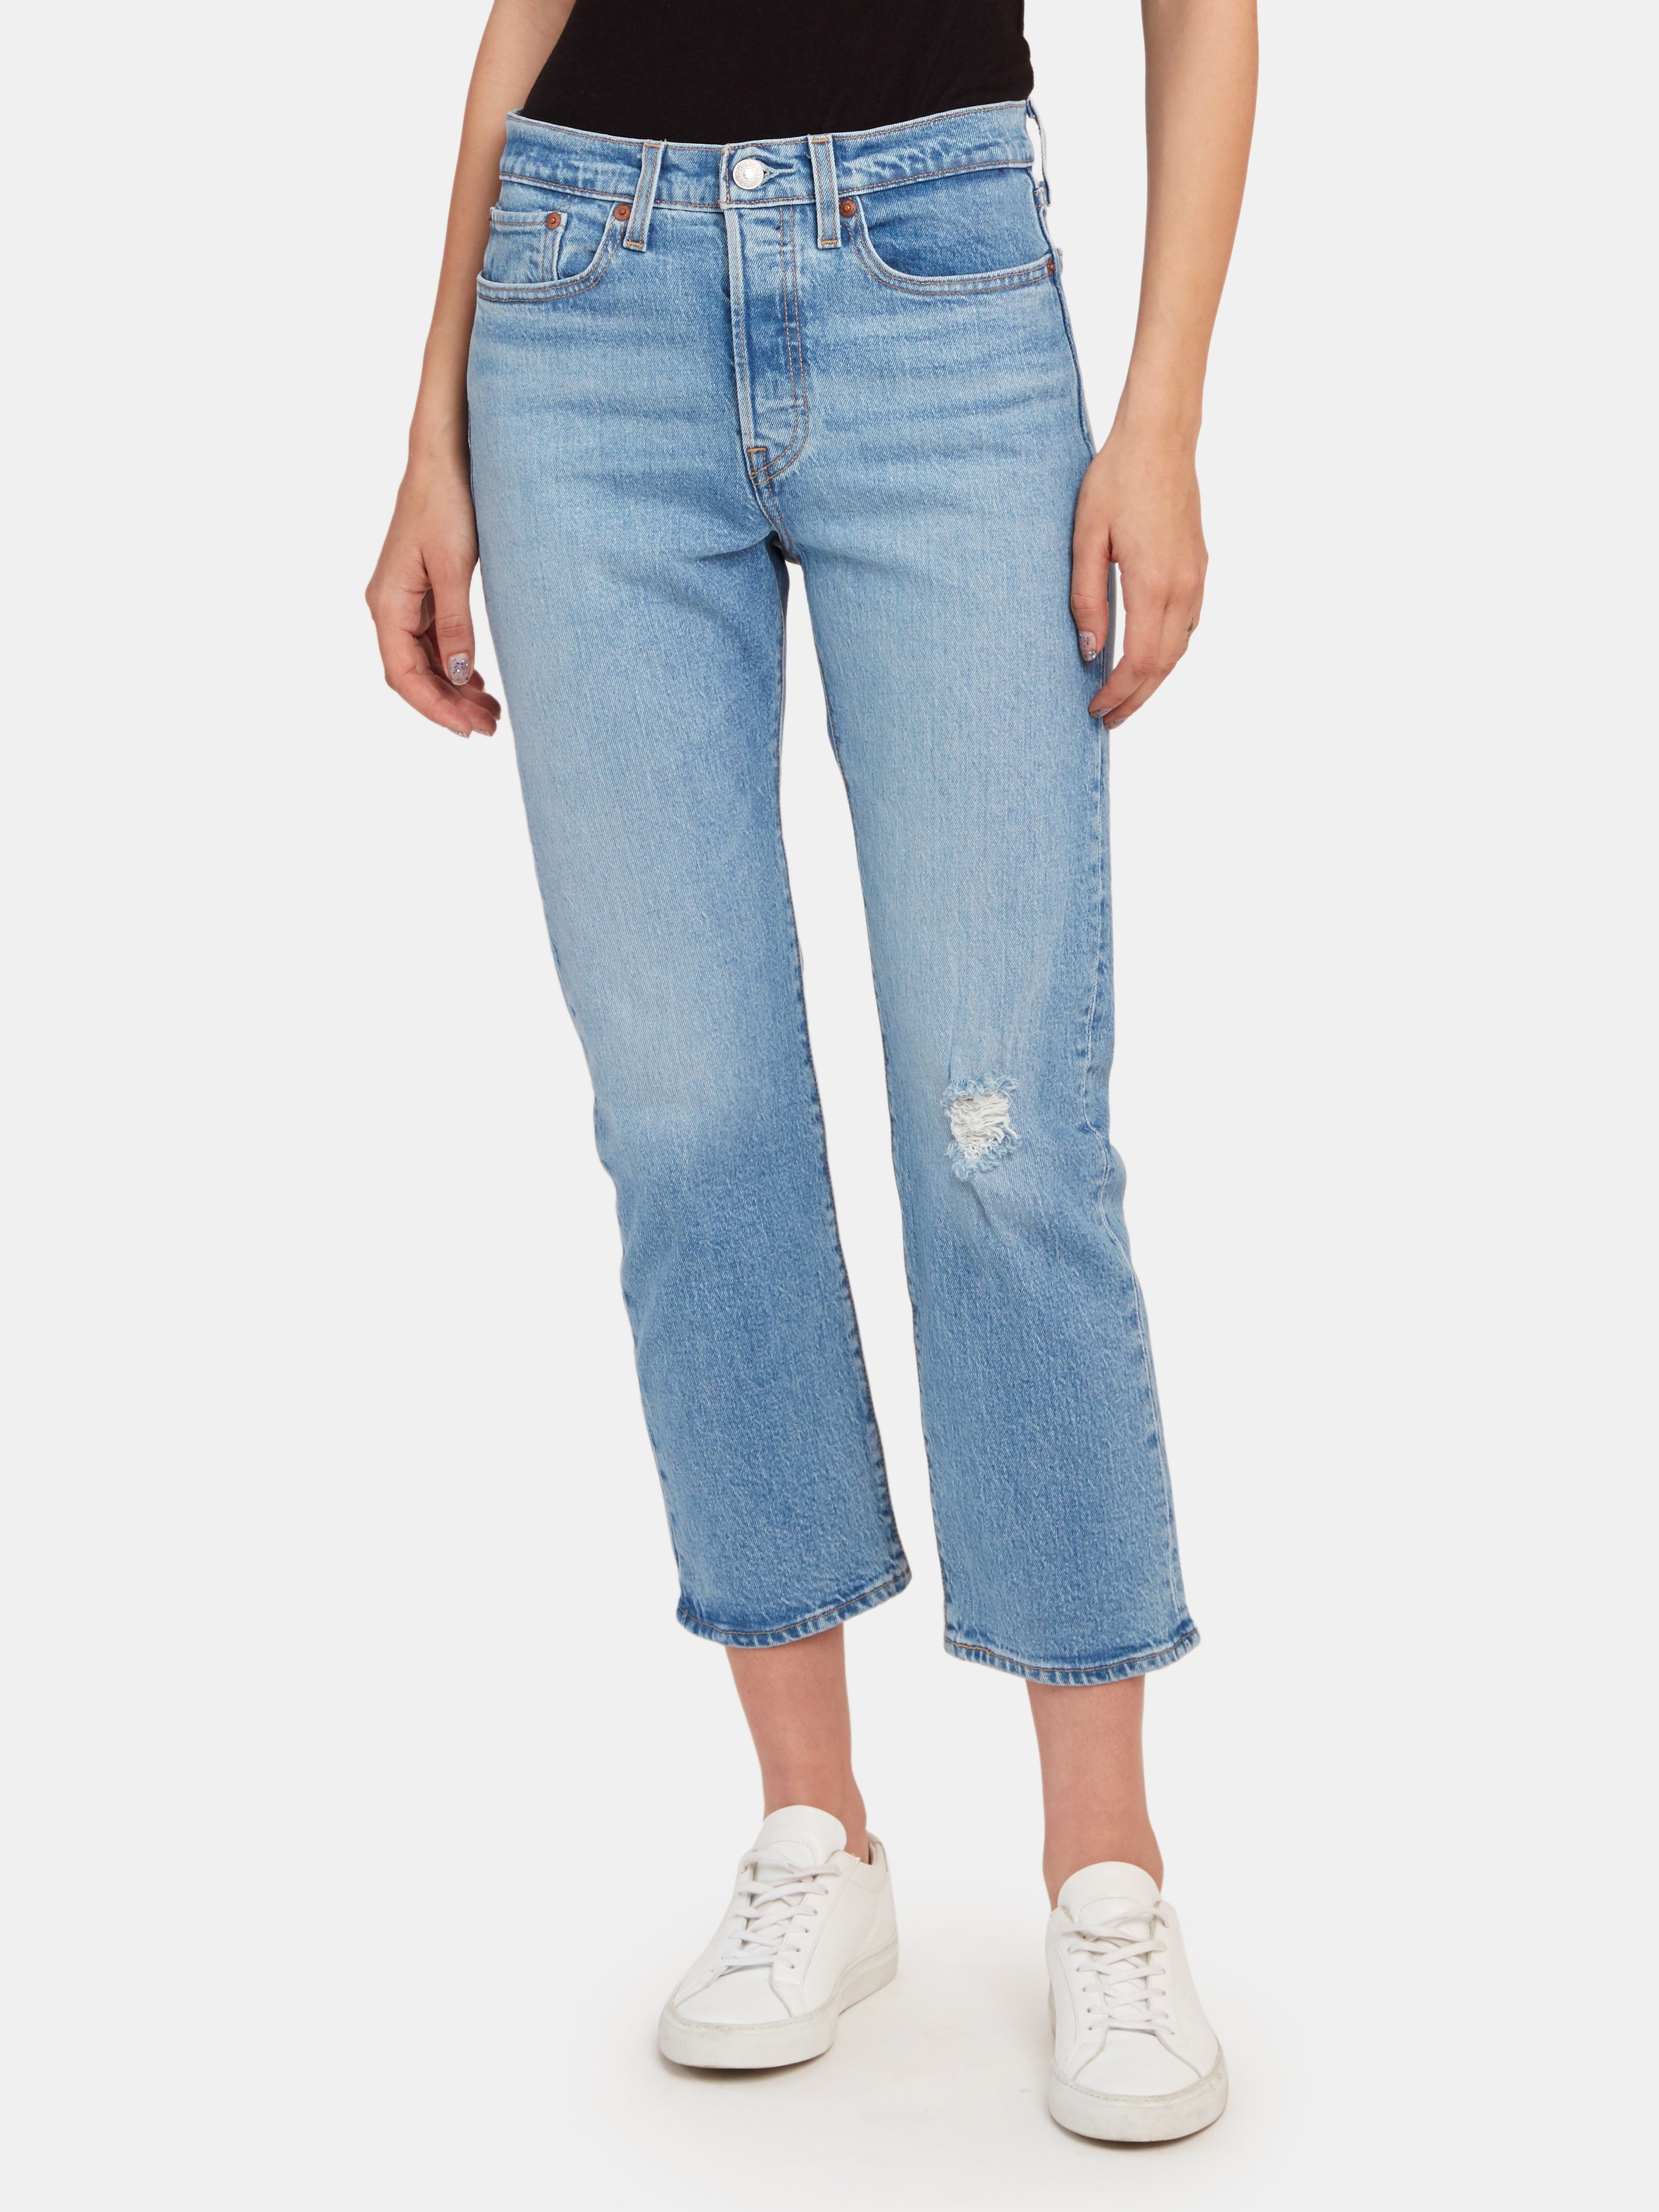 levis wedgie high rise